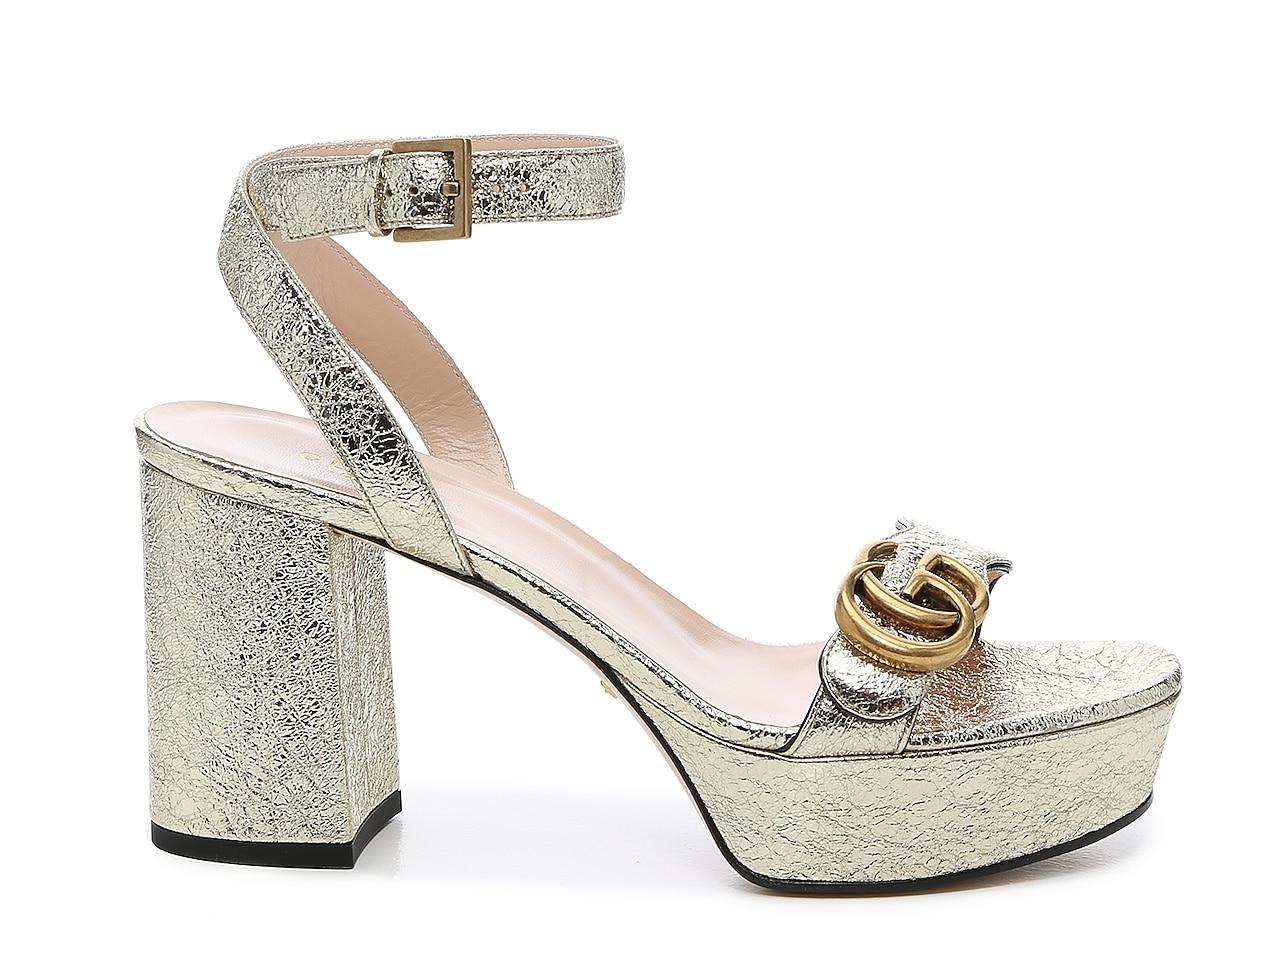 High heeled platform shoes with gold-tone metal trim in white | KYRA